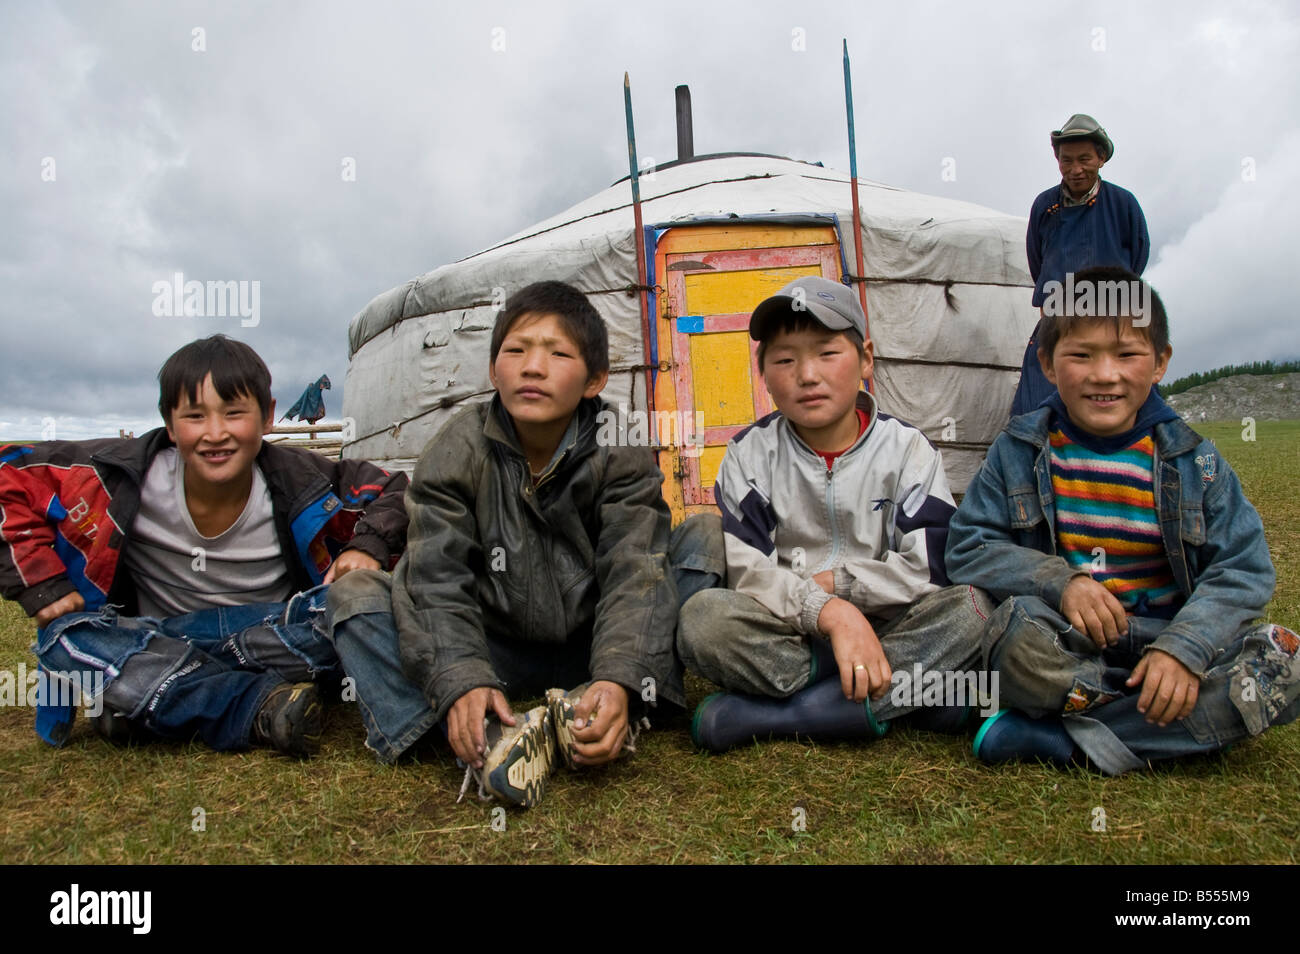 Kids sitting outside the Ger Northern Mongolia Stock Photo